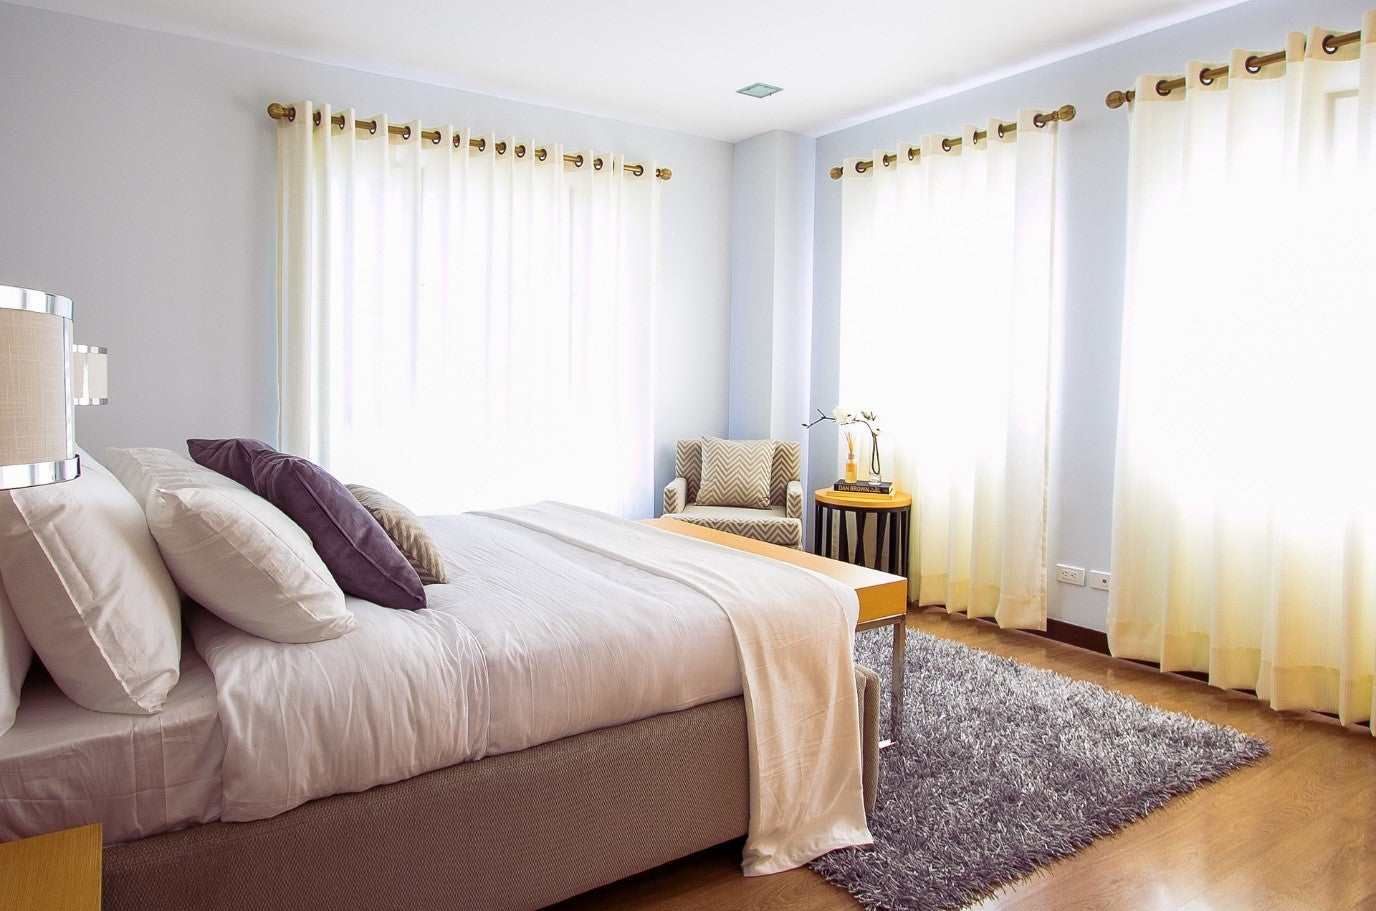 5 Ways to Give Your Bedroom a Summer Makeover